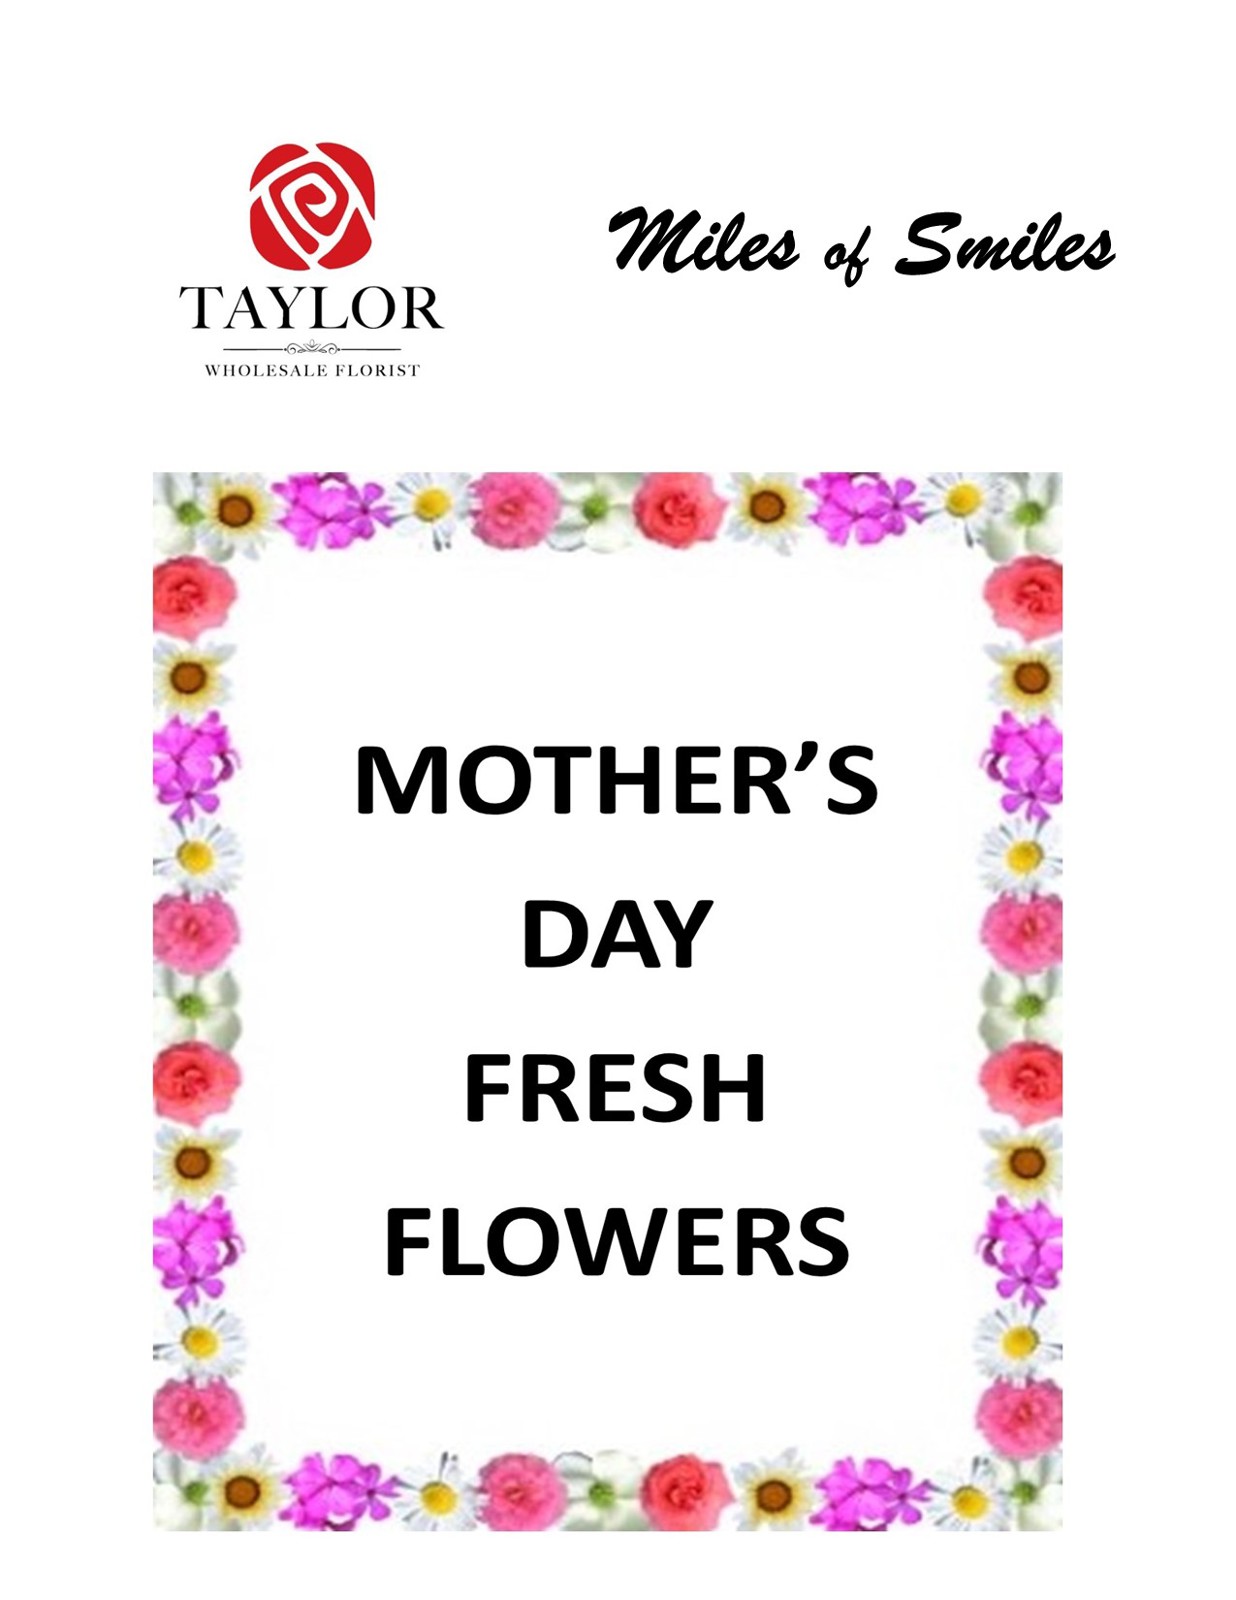 MOTHER'S DAY FRESH FLOWERS